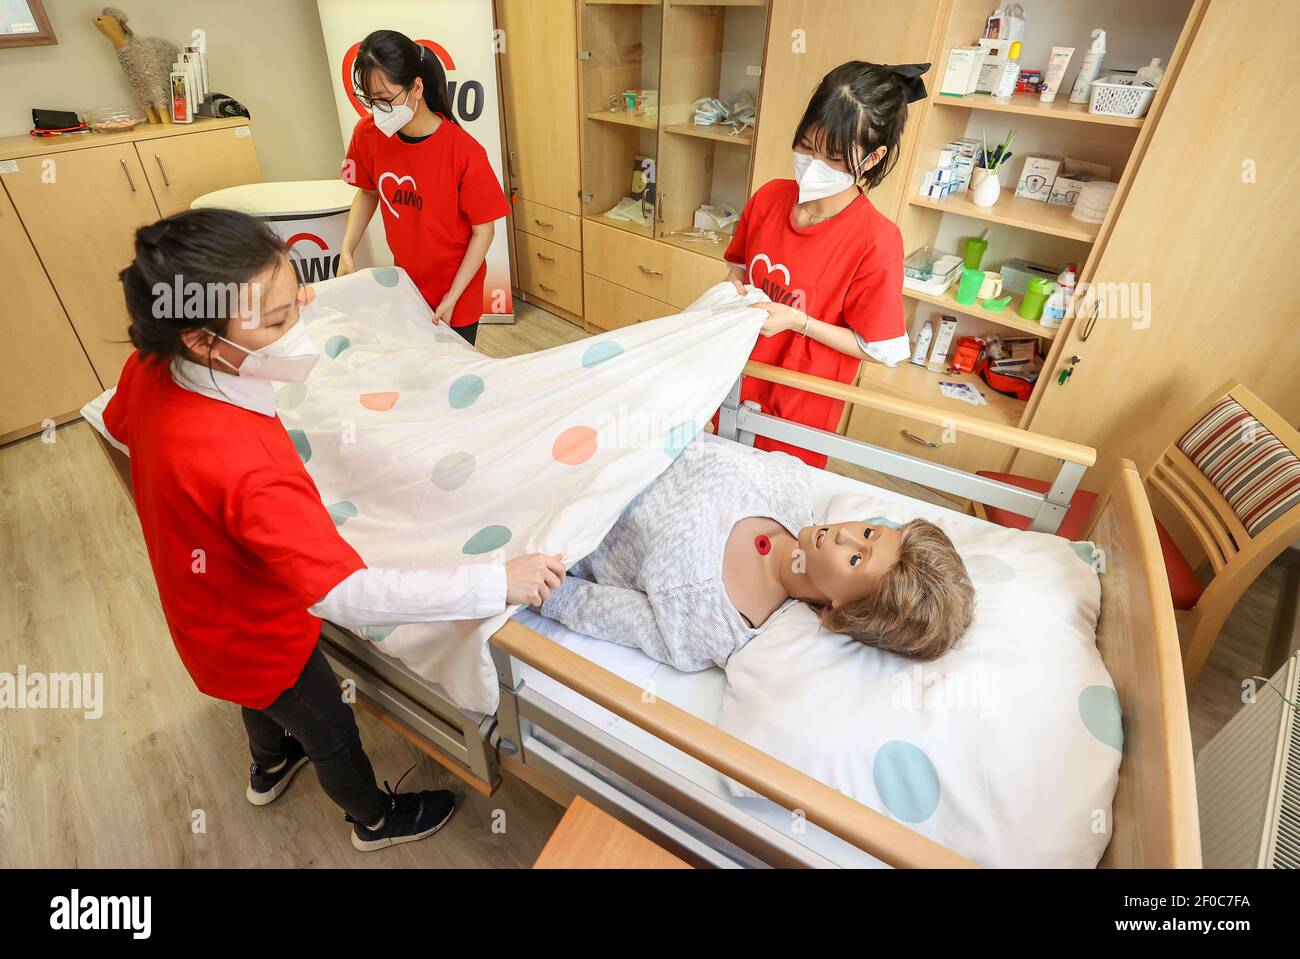 24 February 2021, Saxony, Auerbach (vogtland): The Vietnamese women Nhung Bui (l-r), Tuoi Phung and Oanh Nguyen take care of training dummy Elvira in the training room of the Arbeiterwohlfahrt Vogtland (AWO). The three young women came to Vogtland from their home country Vietnam in 2017 for training. This is now finished - since the beginning of March, they have been working for the AWO as skilled nursing staff. These are in short supply and the need is growing steadily due to the aging population. Four years ago, they were the first, now almost half of the trainees in the field of care at the Stock Photo